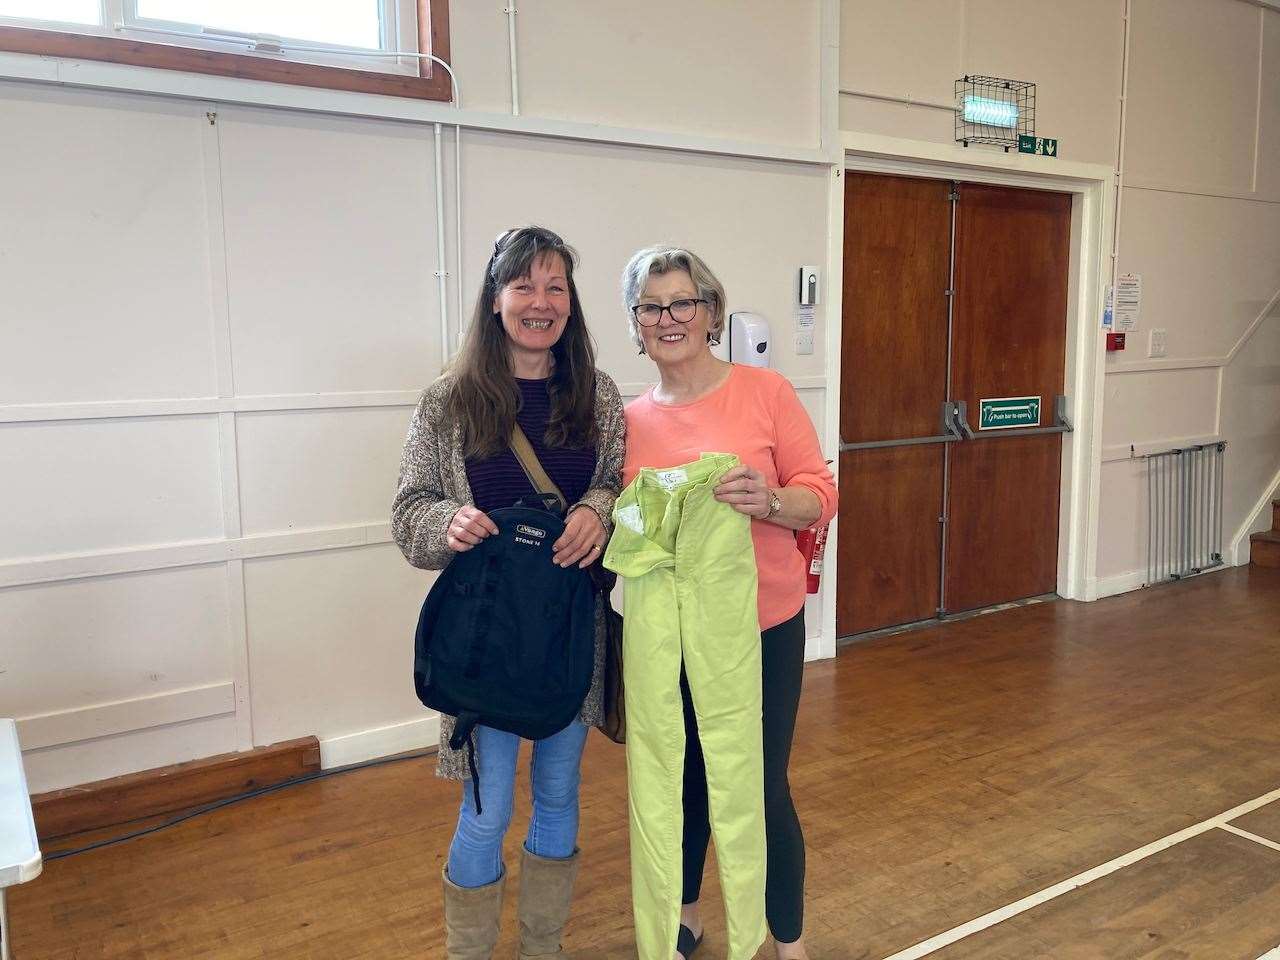 Julie Campbell and Tracey Mantell repaired a pair of trousers and the strap on a rucksack.